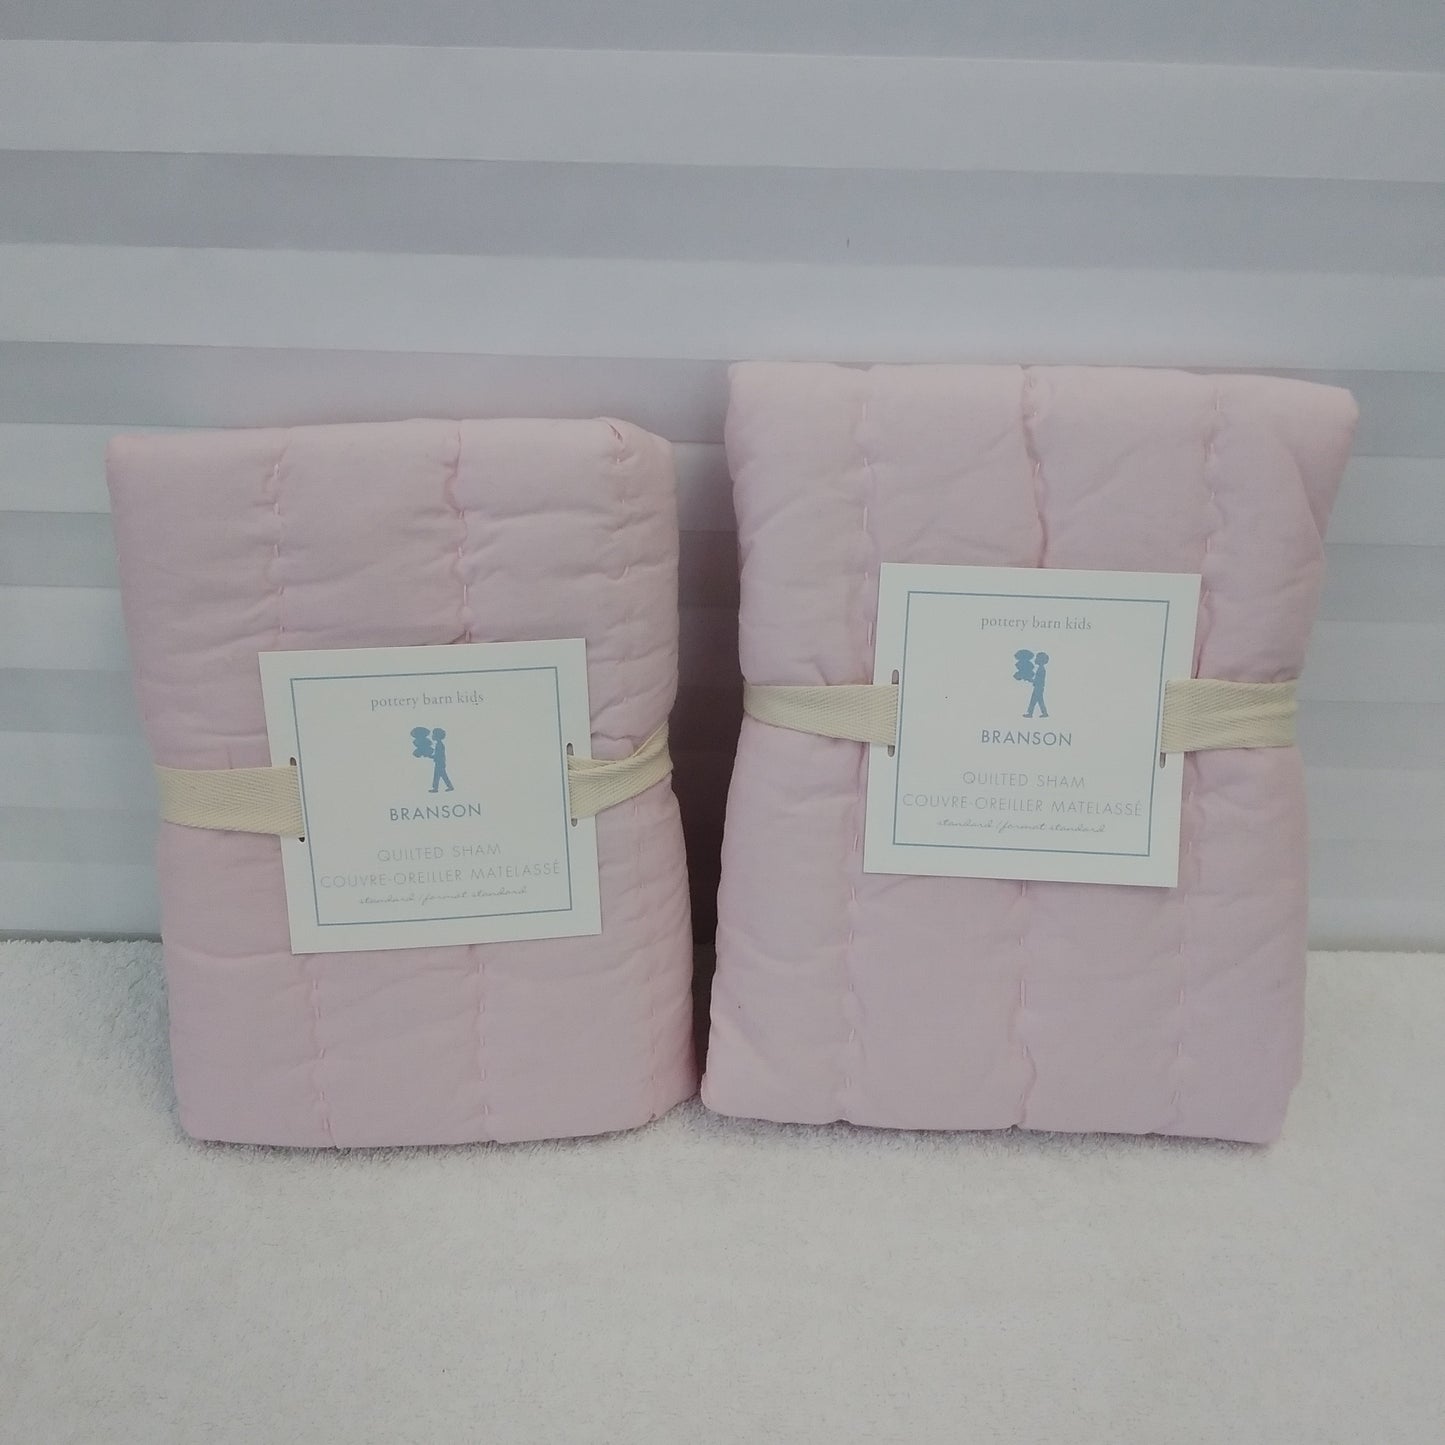 NWT - Set of 2 Pottery Barn kids Branson Pink Quilted Pillow Sham - Standard Size: 20"x26"